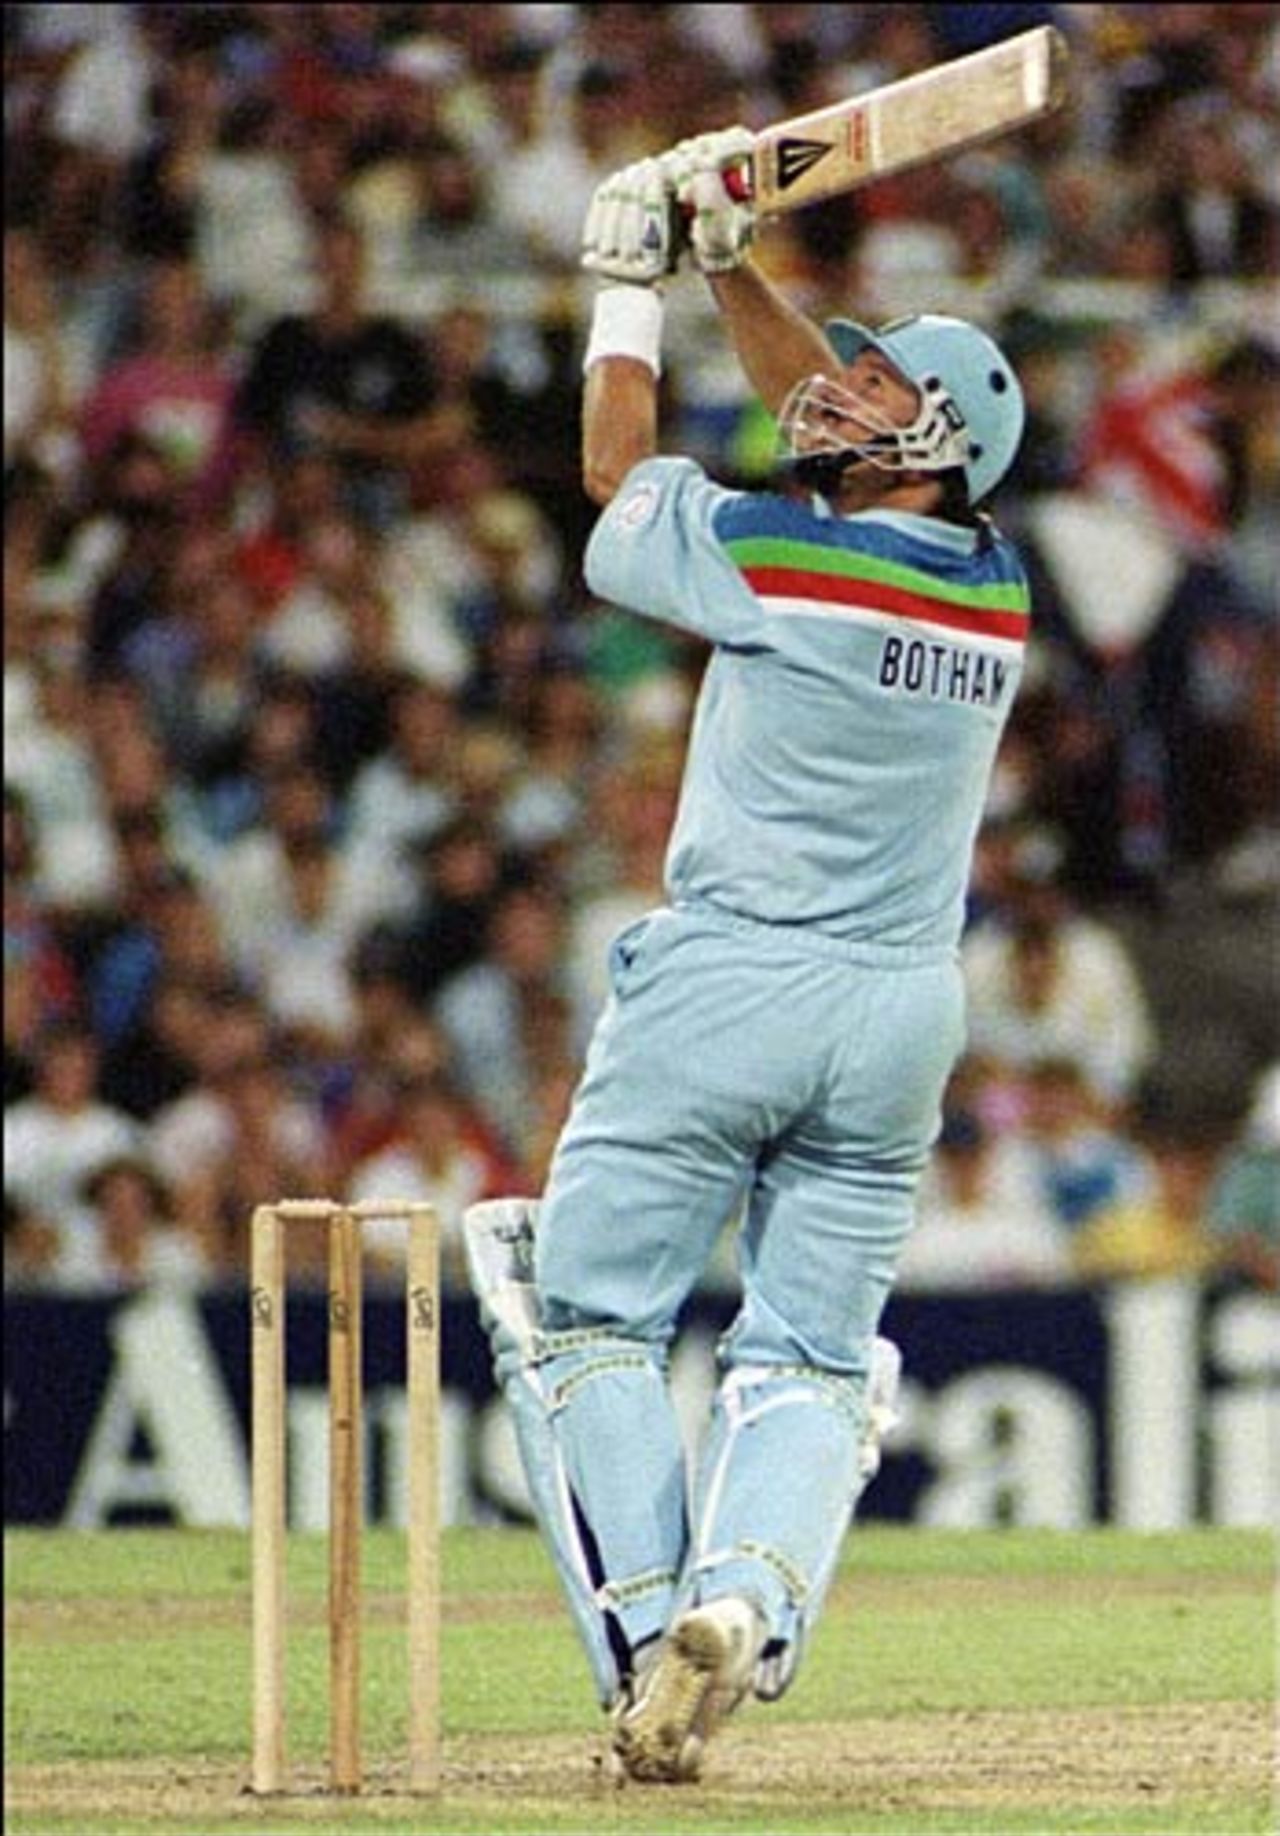 Ian Botham batting in the World Cup final, Melbourne, 1992